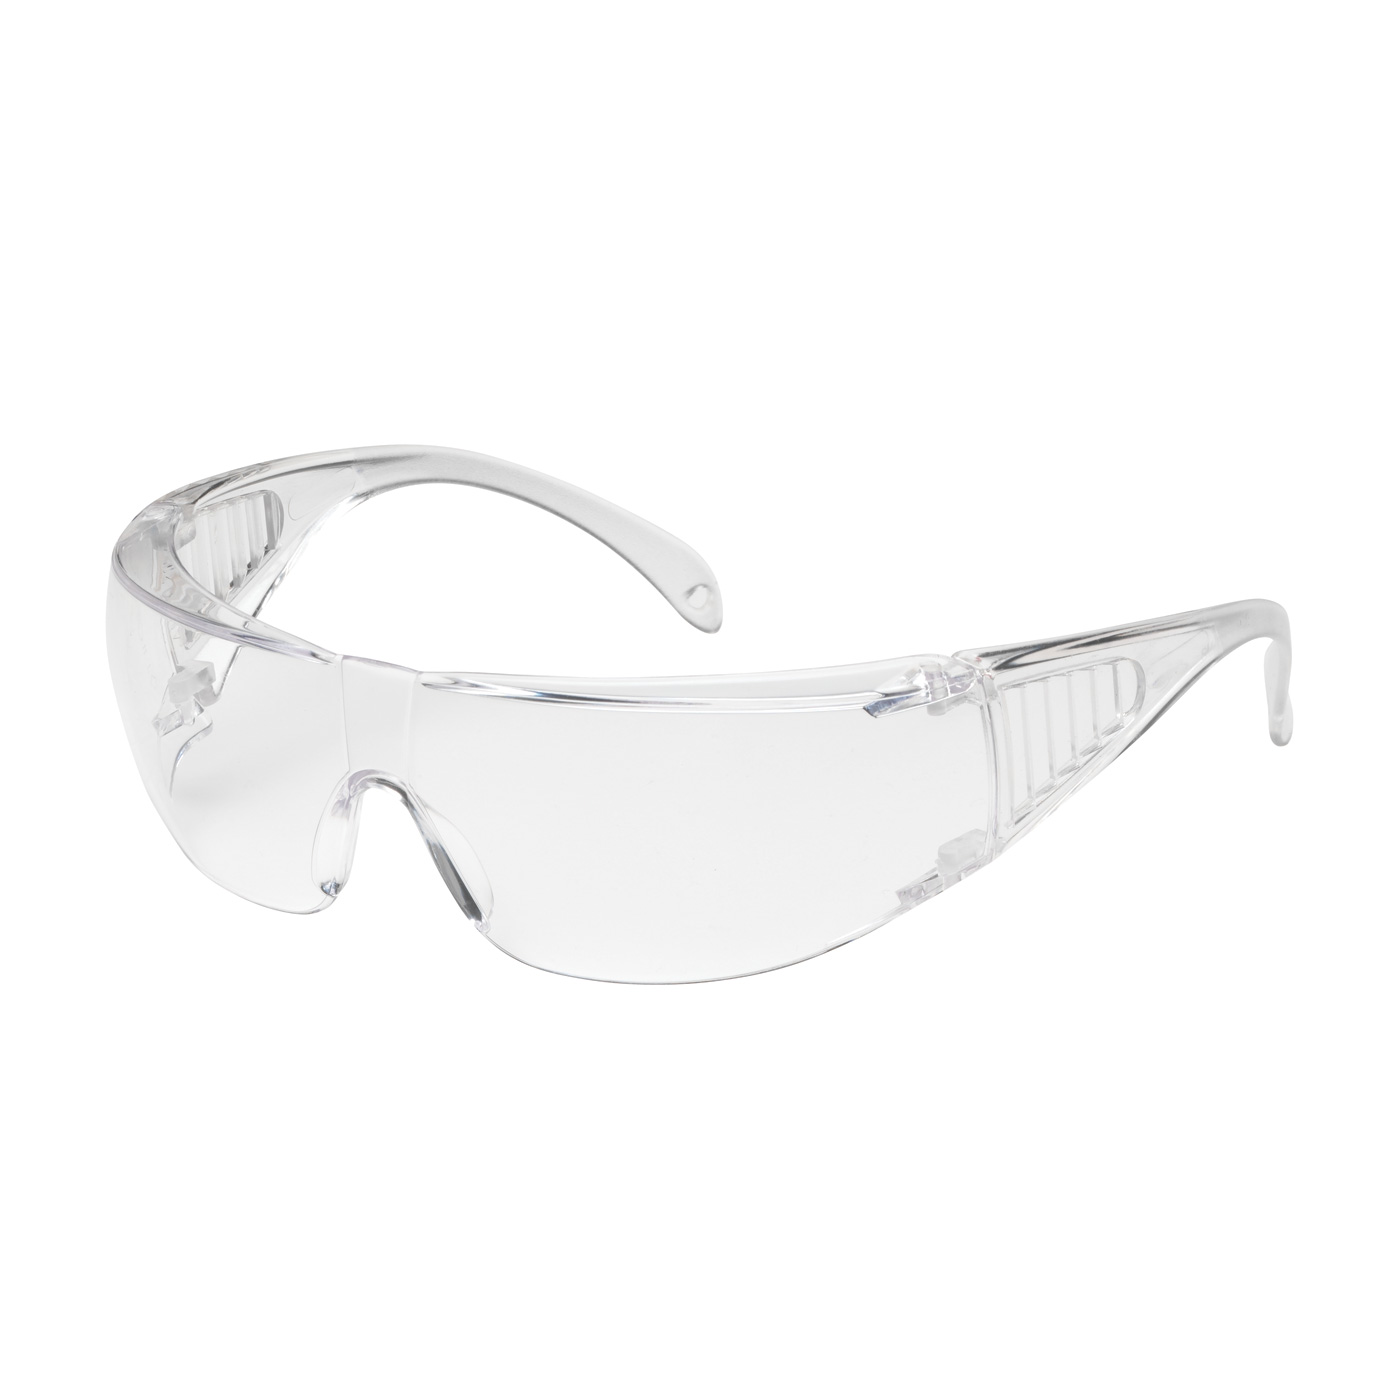 PIP Ranger™ OTG Rimless Safety Glasses with Clear Temple, Clear Lens and Anti-Scratch Coating 